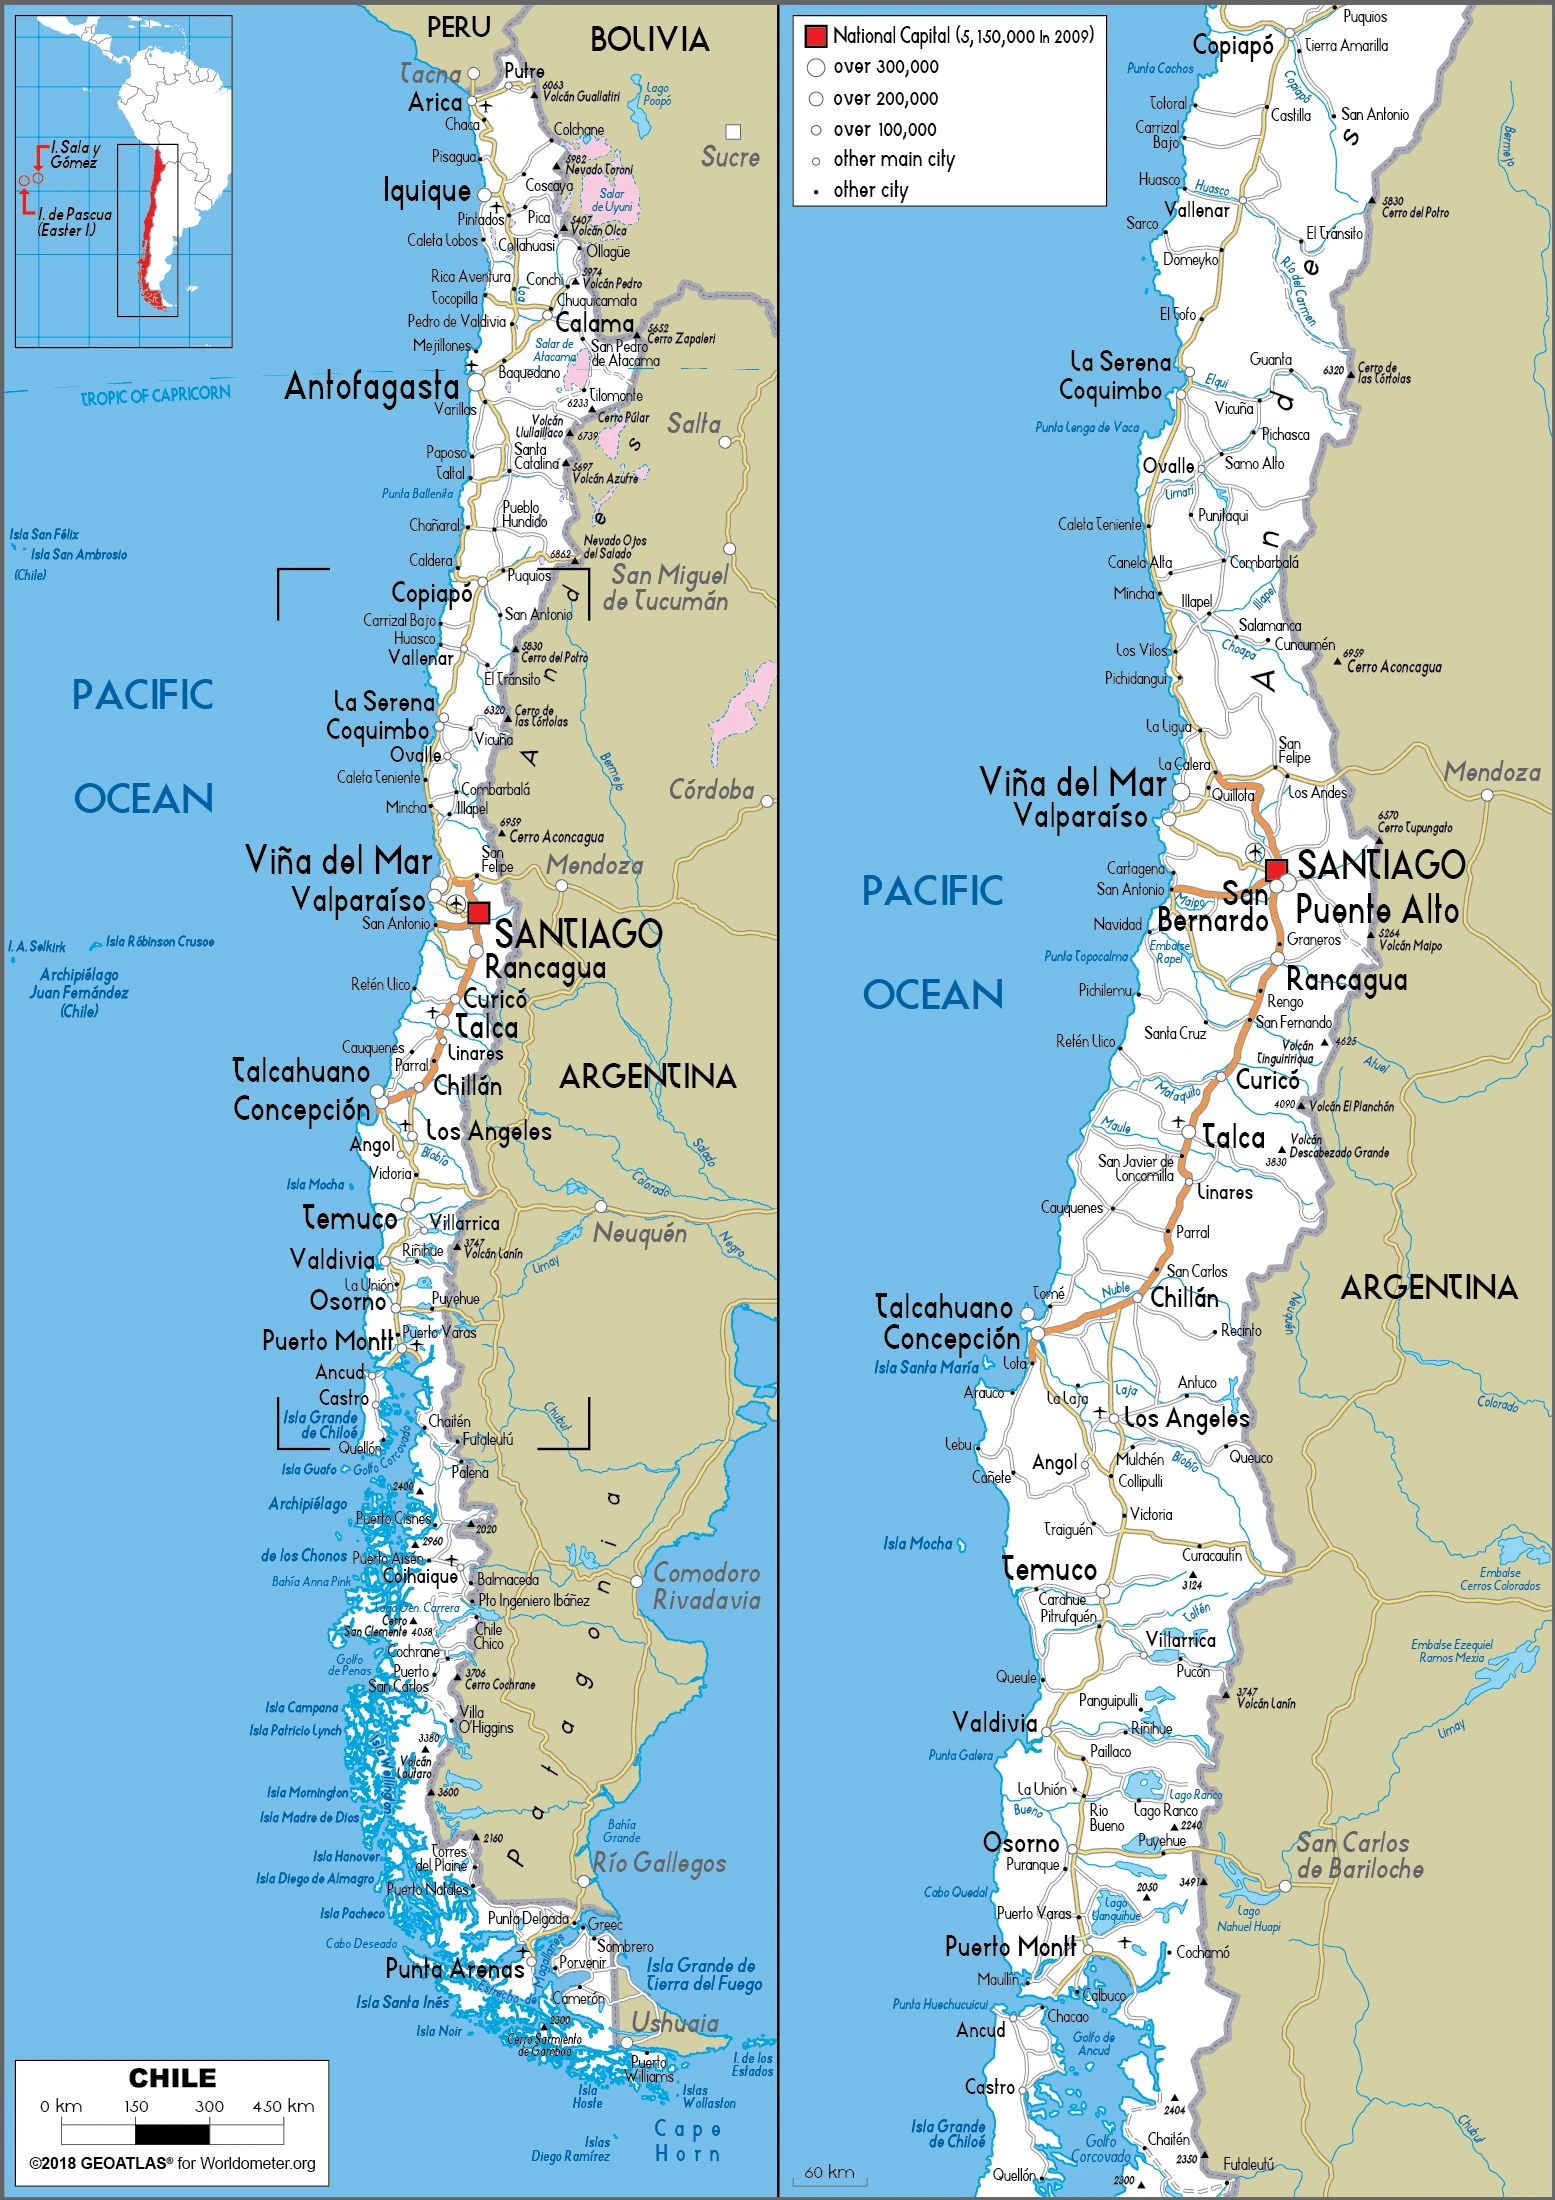 The route plan of the Chilean roadways.